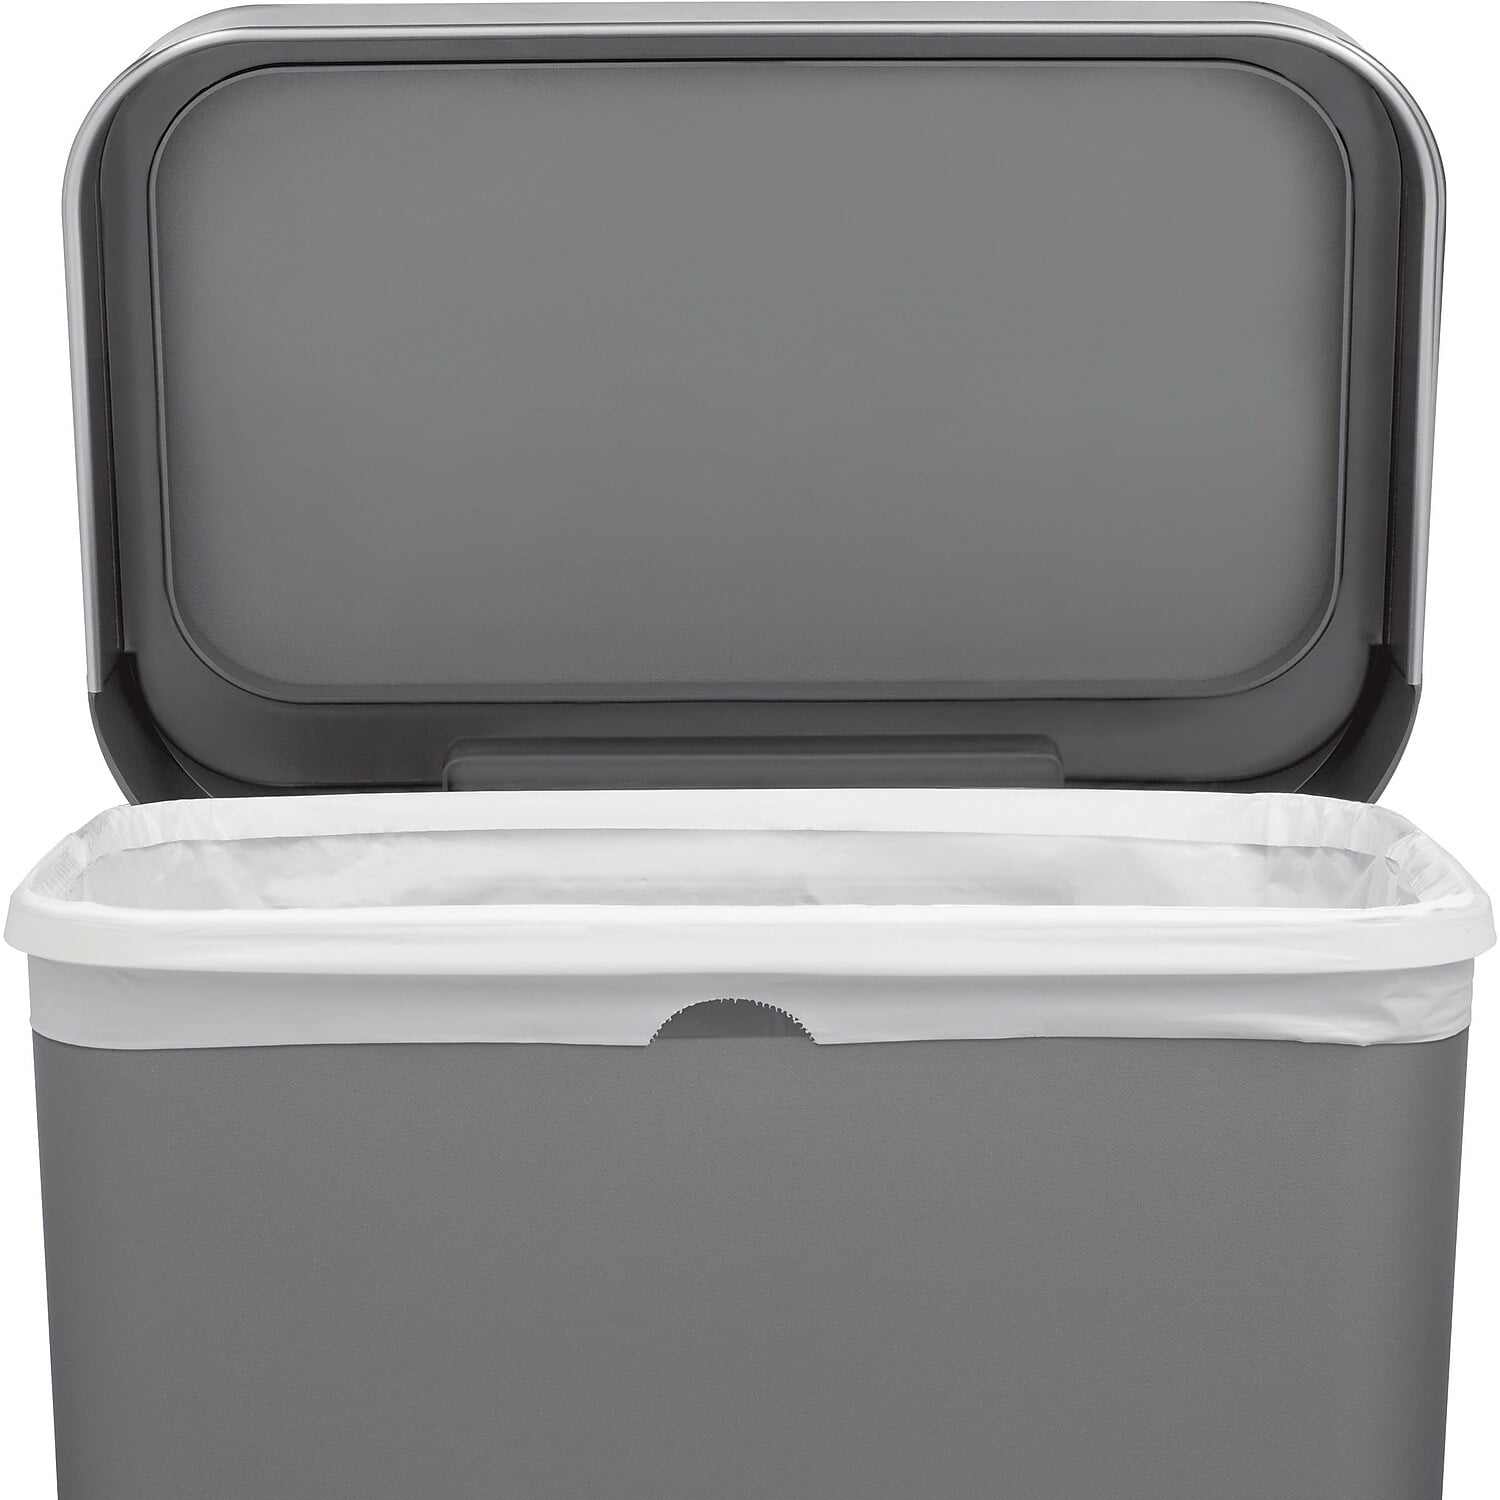  simplehuman Custom Fit Trash Can Liner N, 45 Liters / 12  Gallons, 20-Count (Pack of 2) : Health & Household